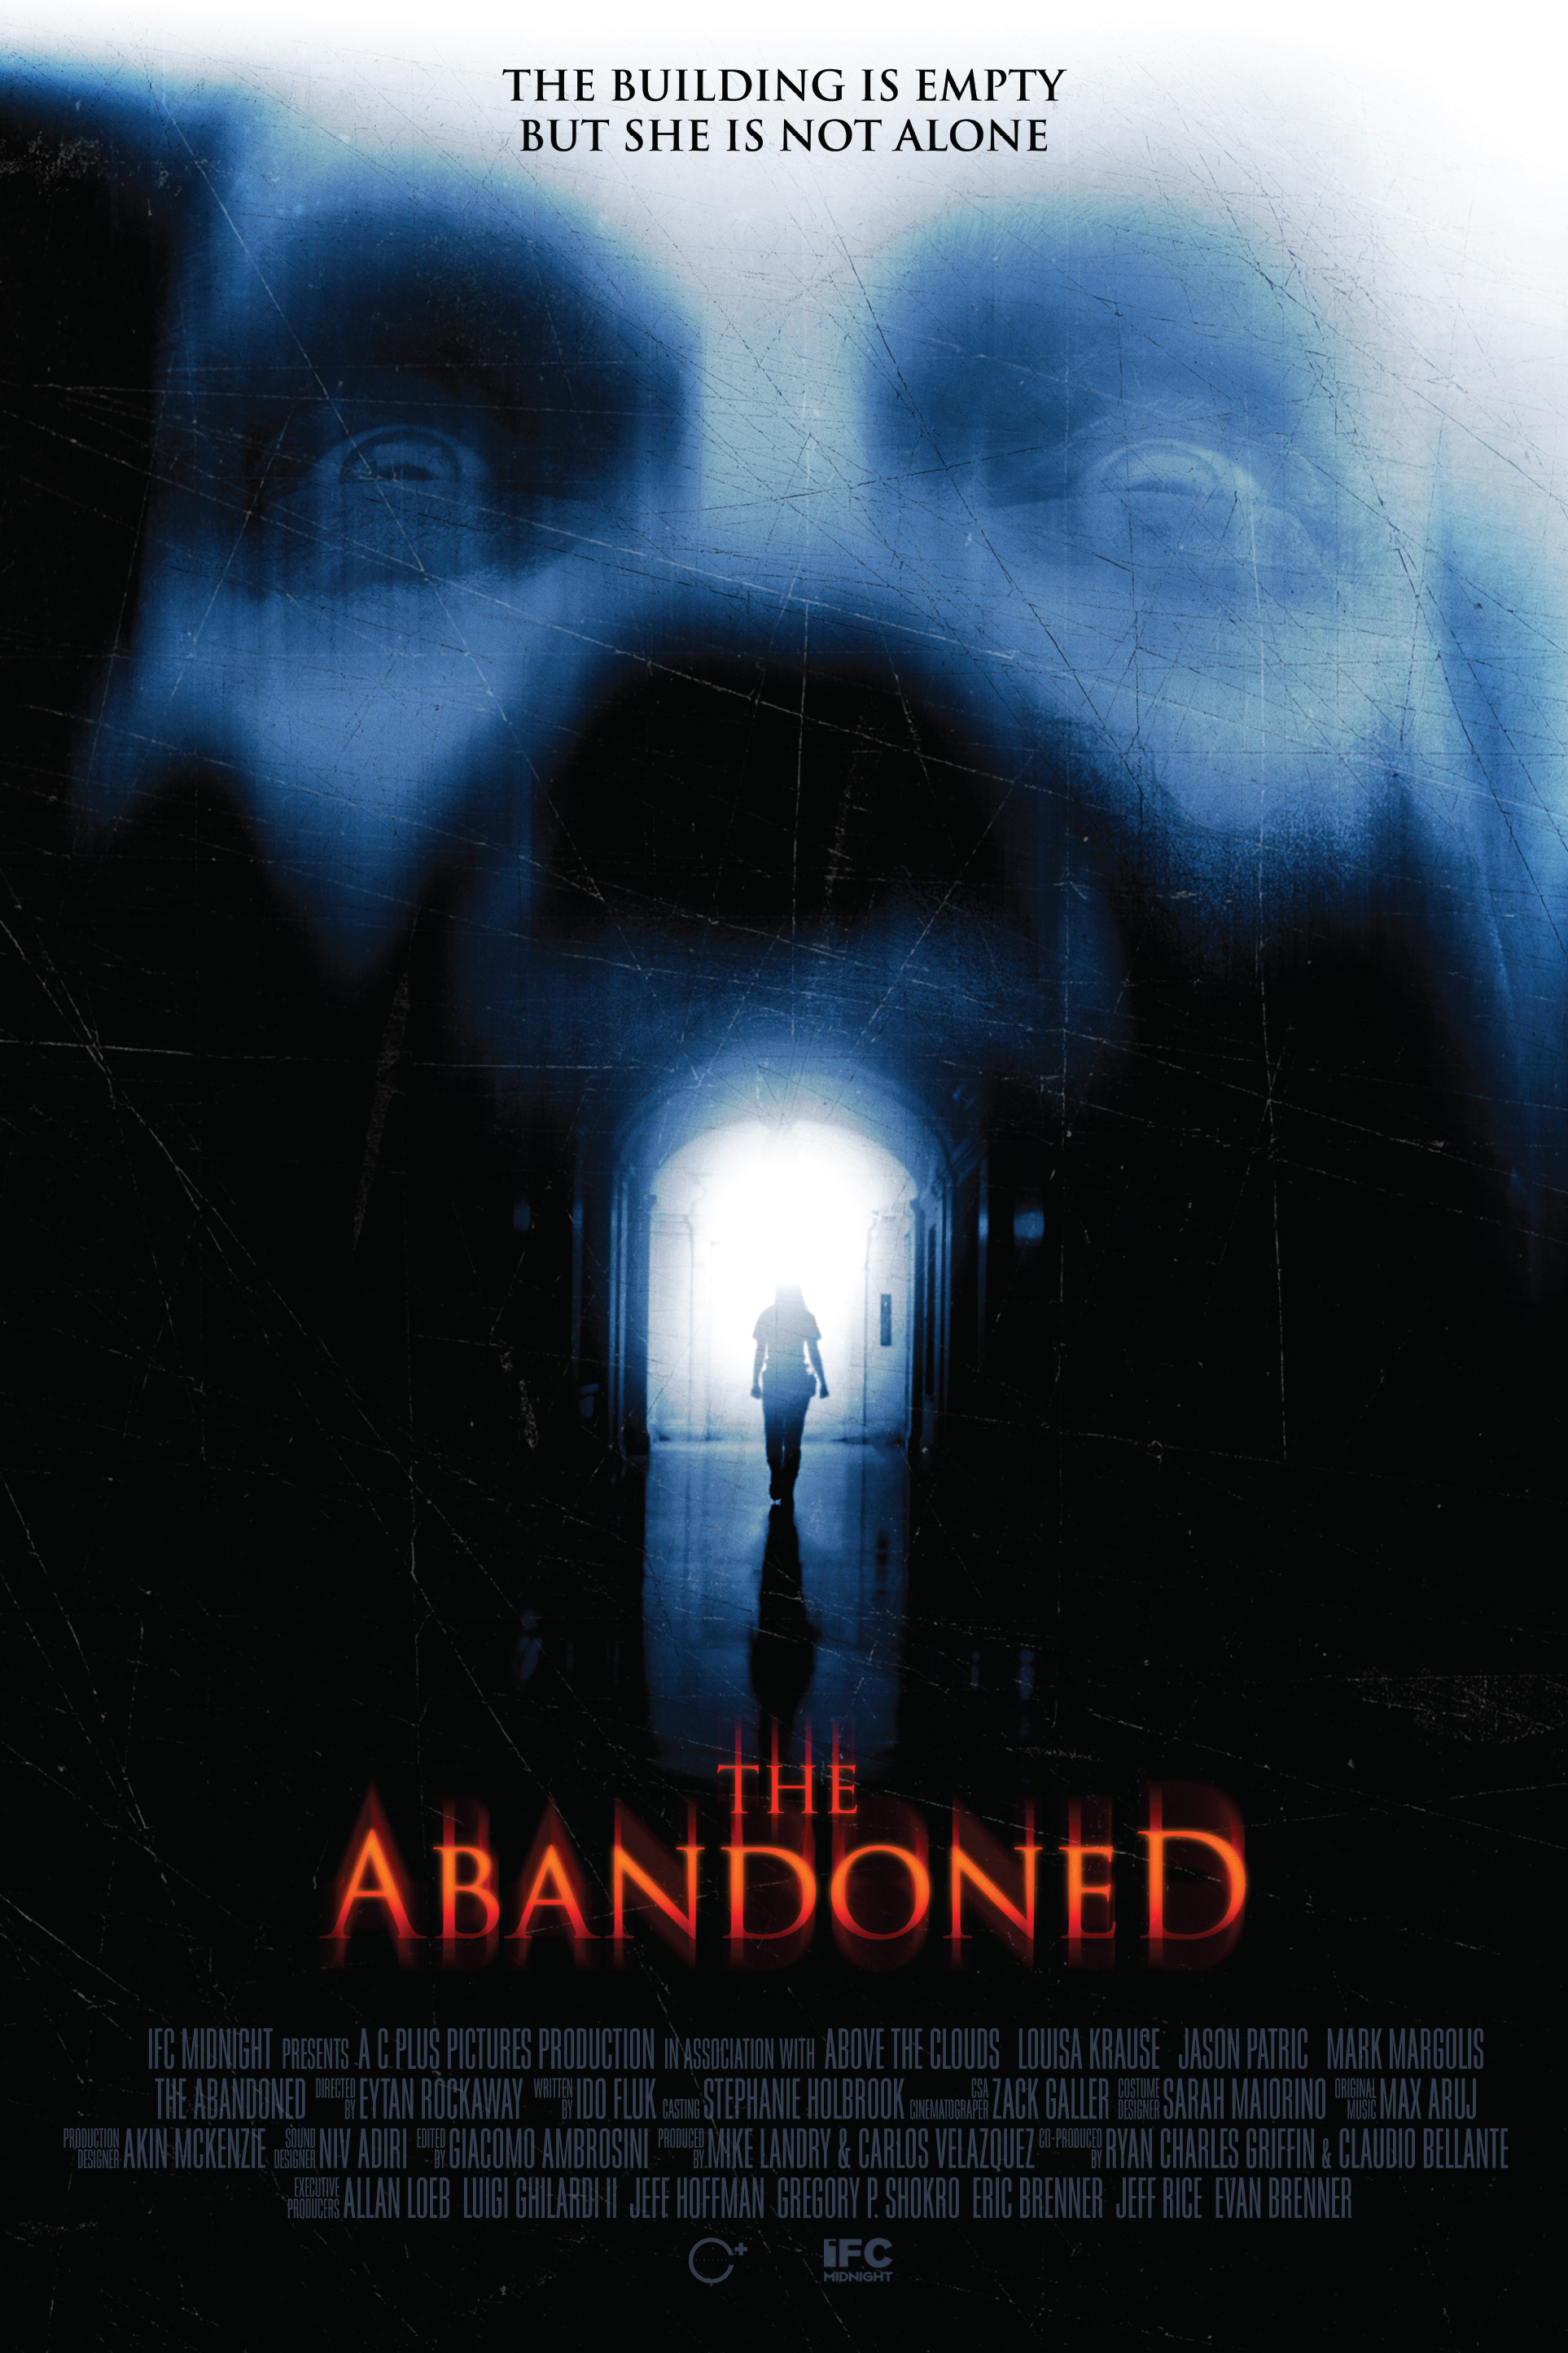 The Abandoned Horror, Aliens, zombies, vampires, creature features